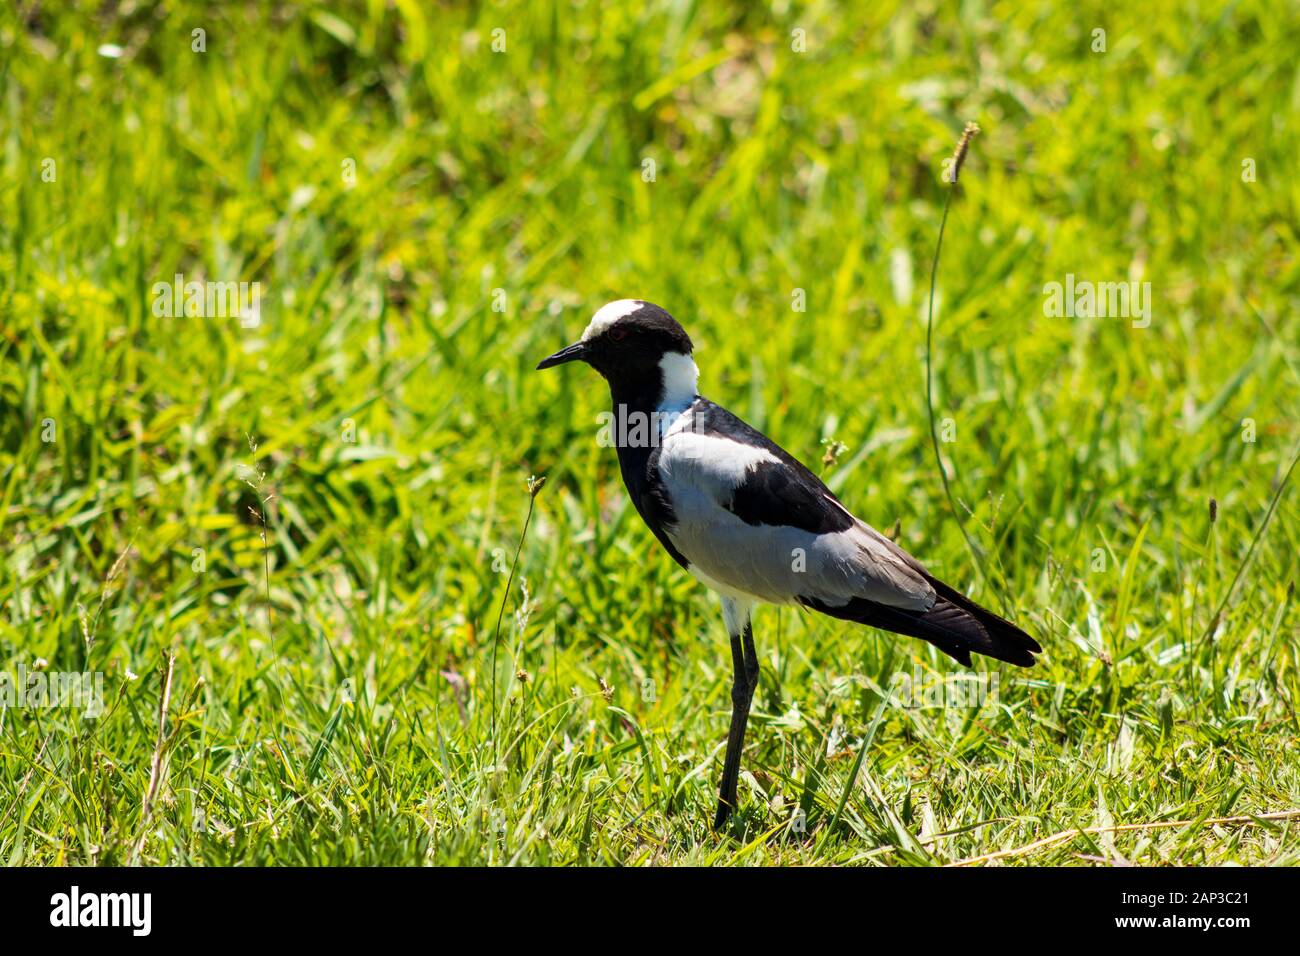 A Blacksmith Plover or Lapwing with grass as background Stock Photo